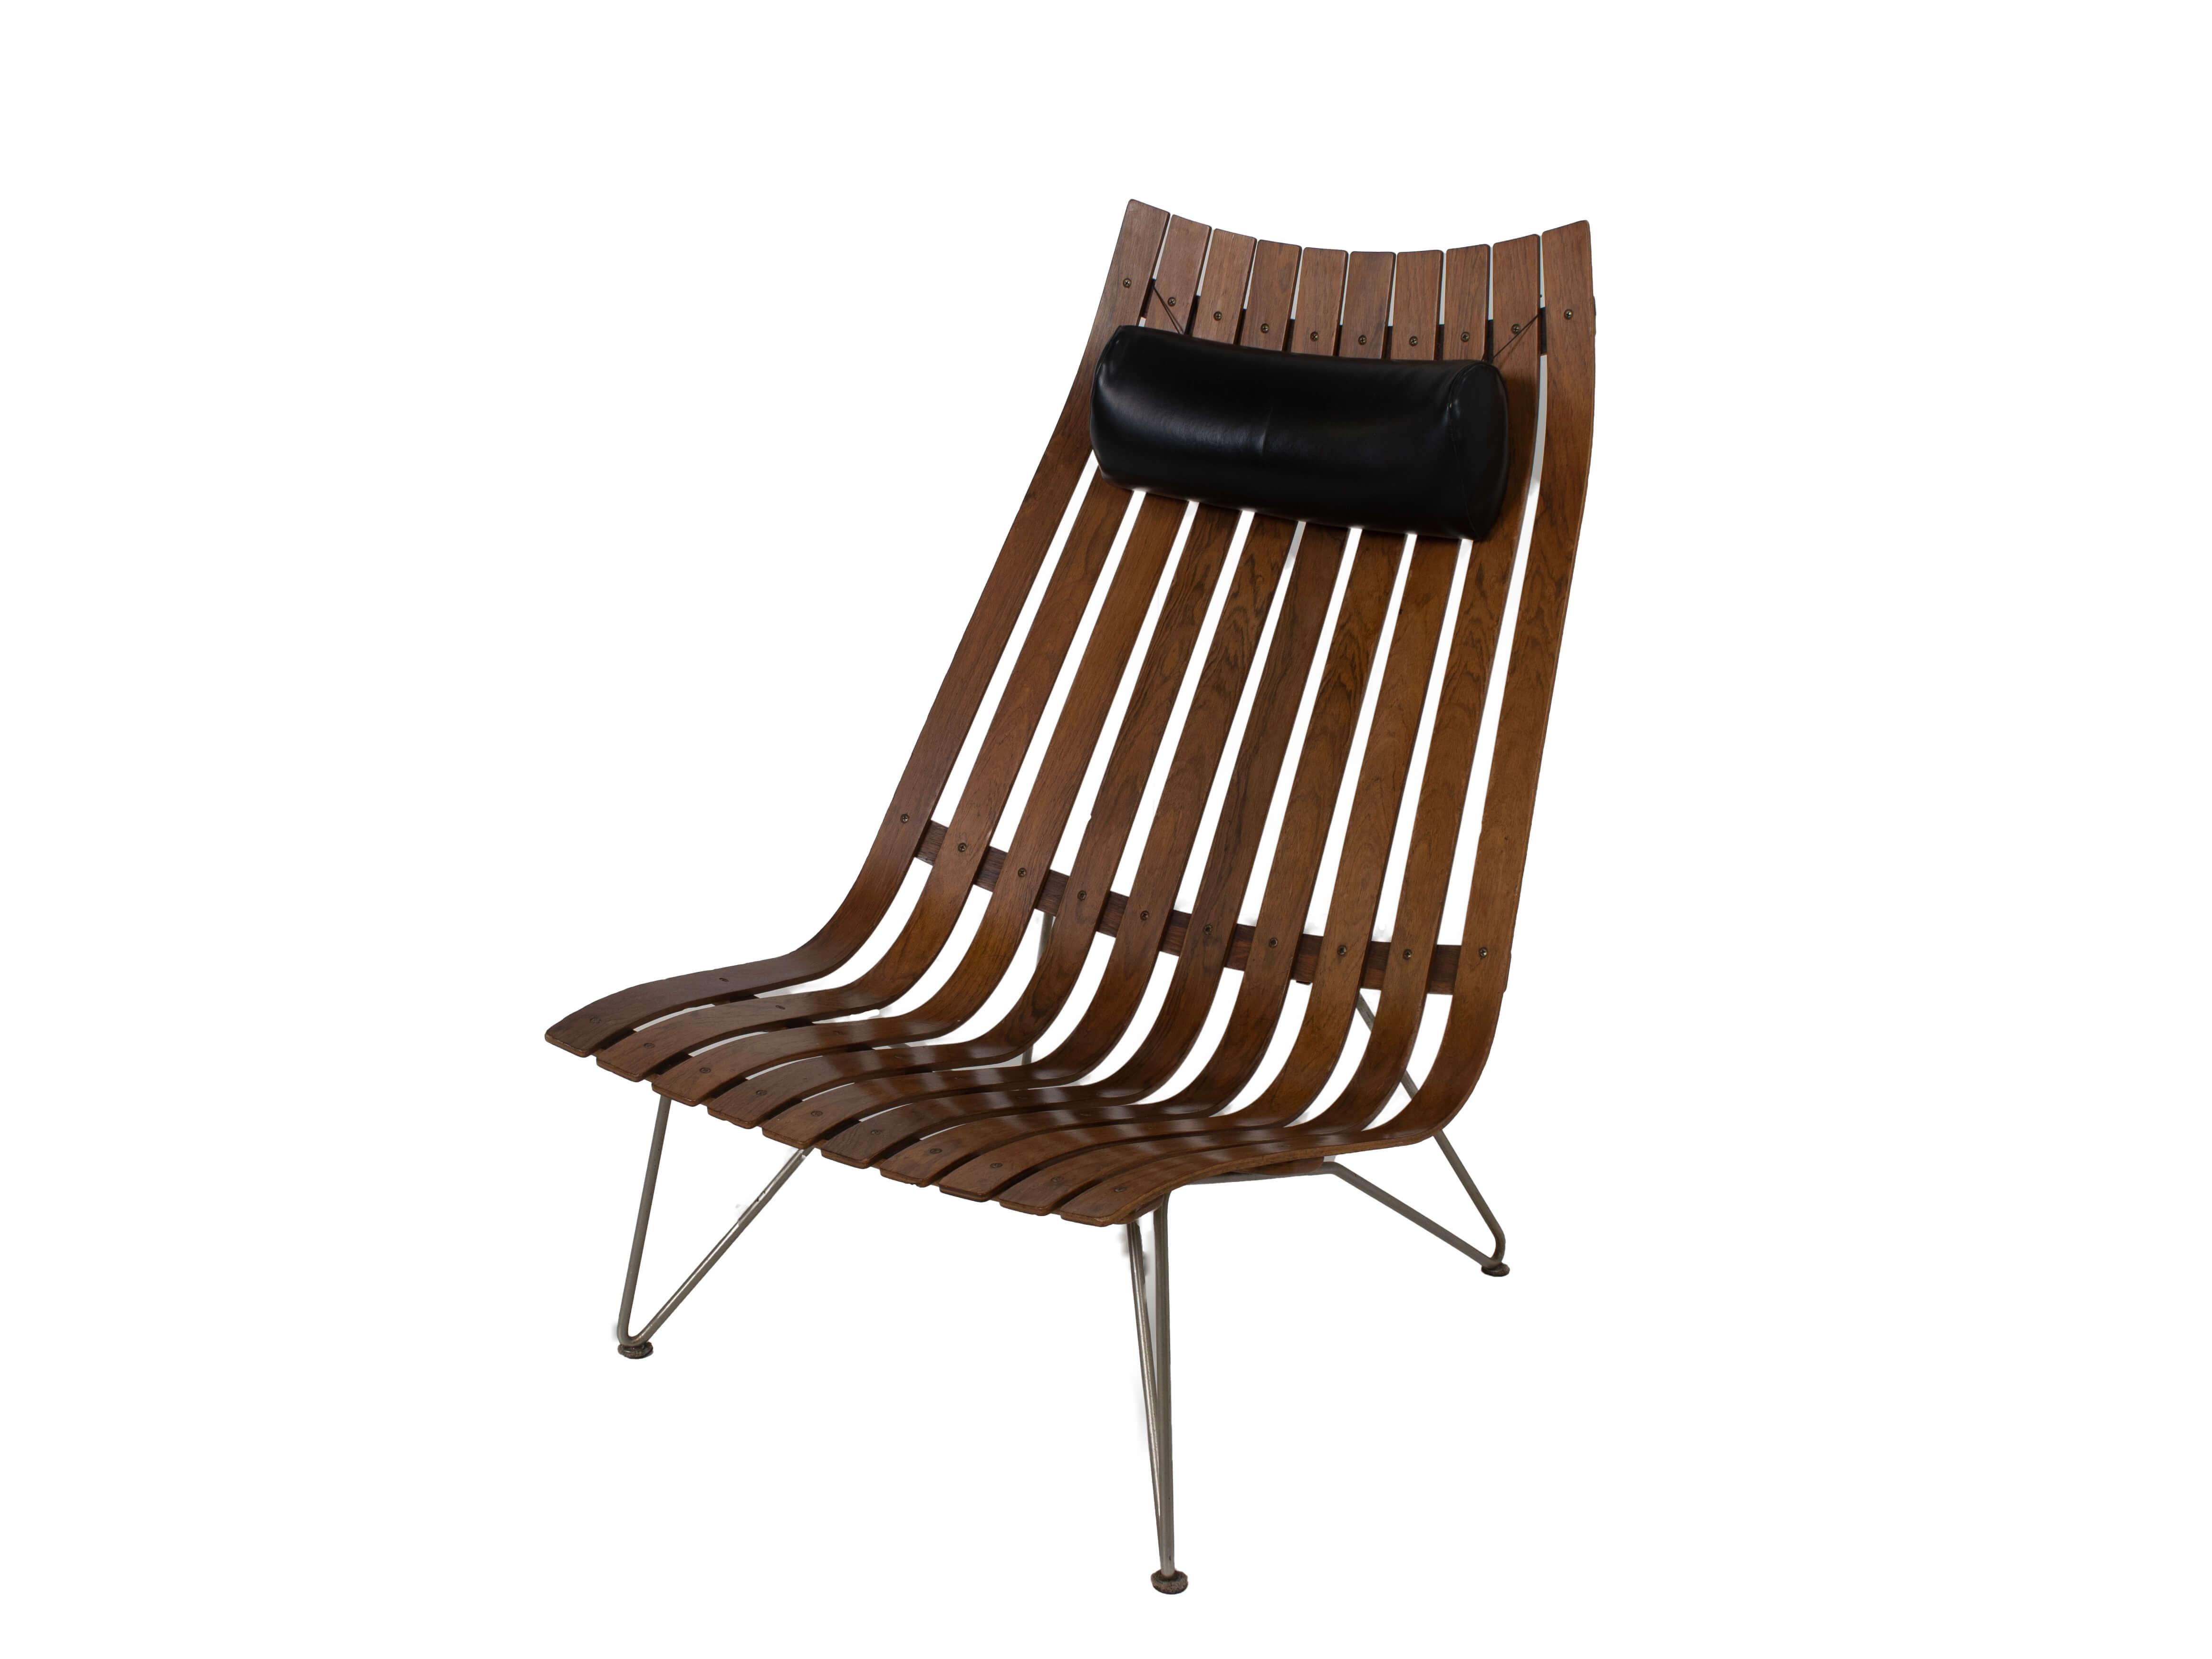 Amazing lounge chair, model Scandia designed by Hans Brattrud for Hove Møbler, Norway 1960s. This chair is made with rosewood veneered slats hand has a metal base. On top it has a leather cushion to make it even more comfortable. The chair is of